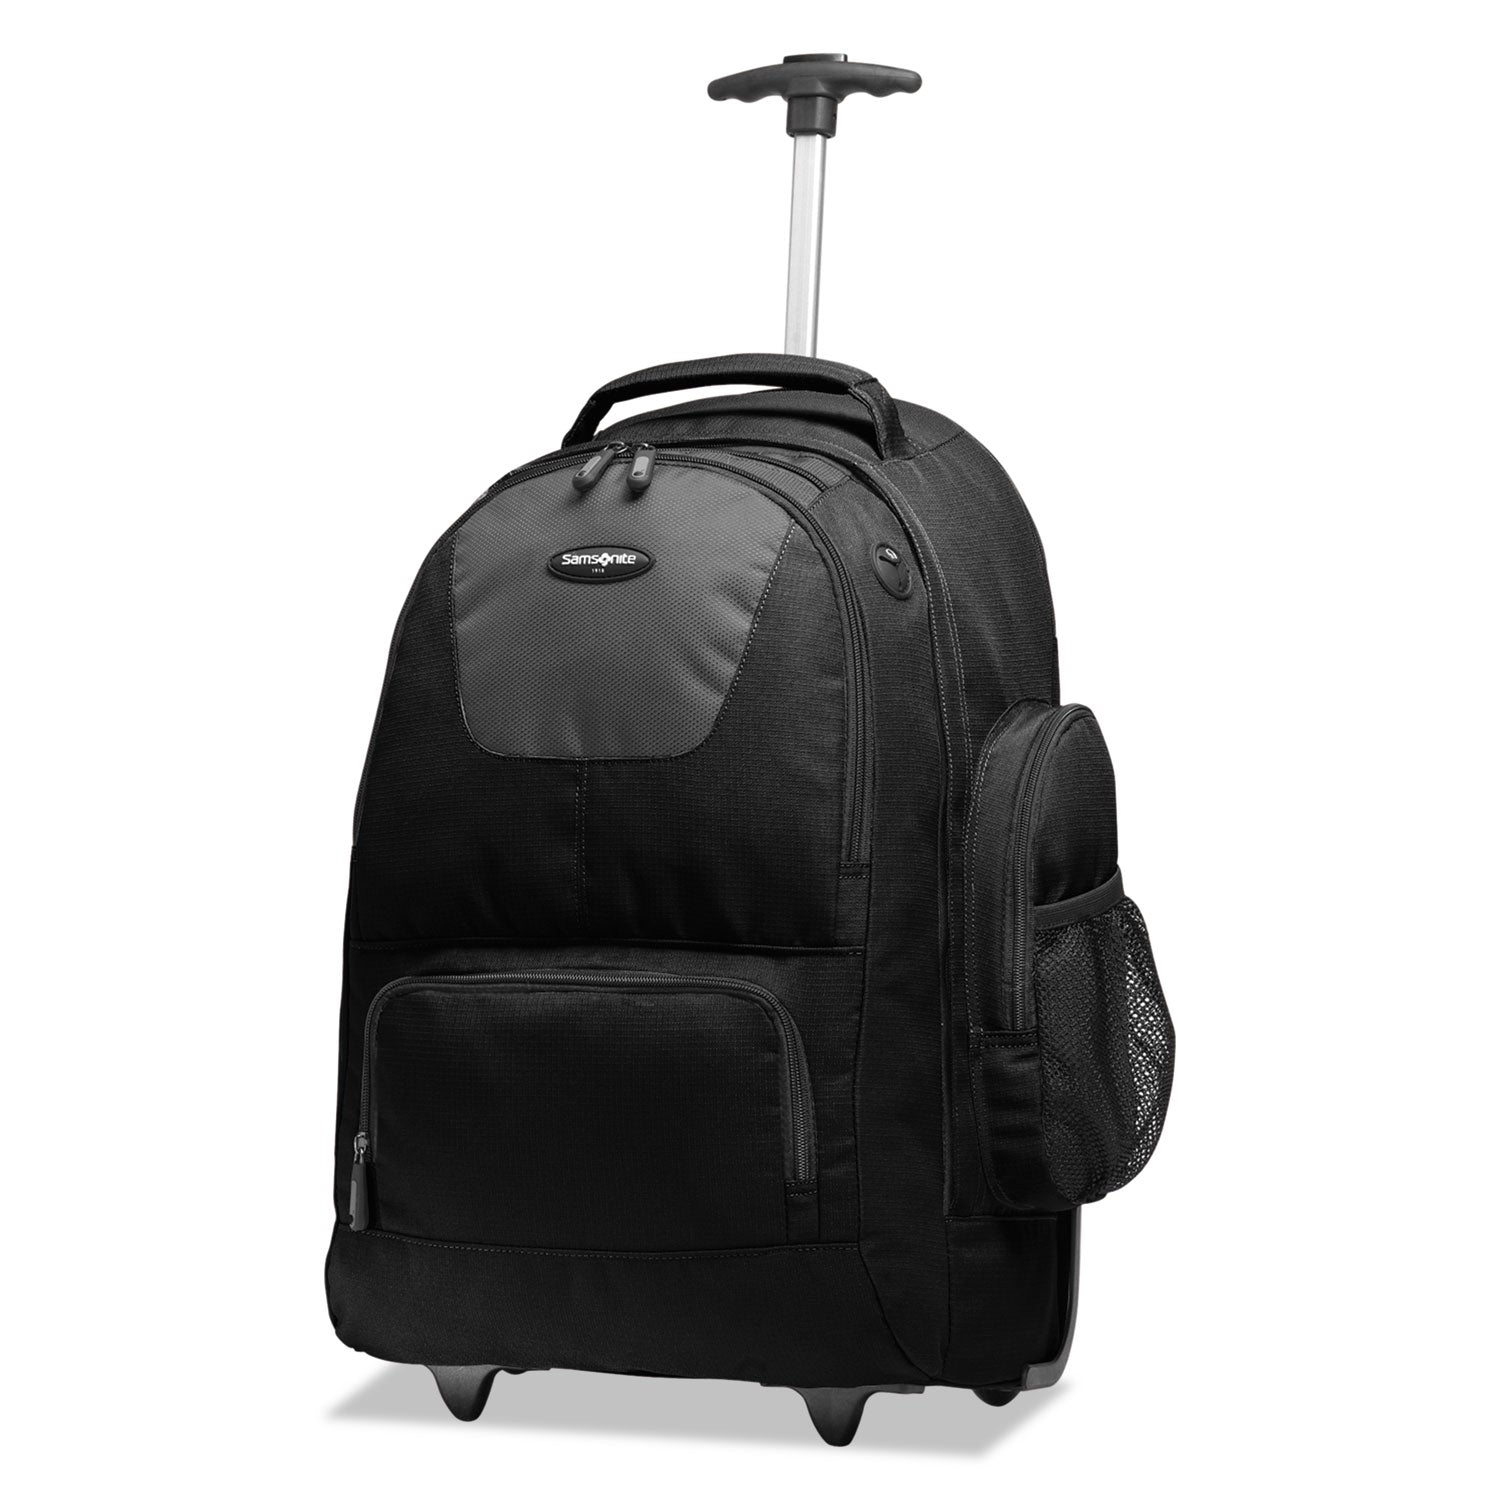 rolling-backpack-fits-devices-up-to-156-polyester-14-x-8-x-21-black-charcoal_sml178961053 - 1